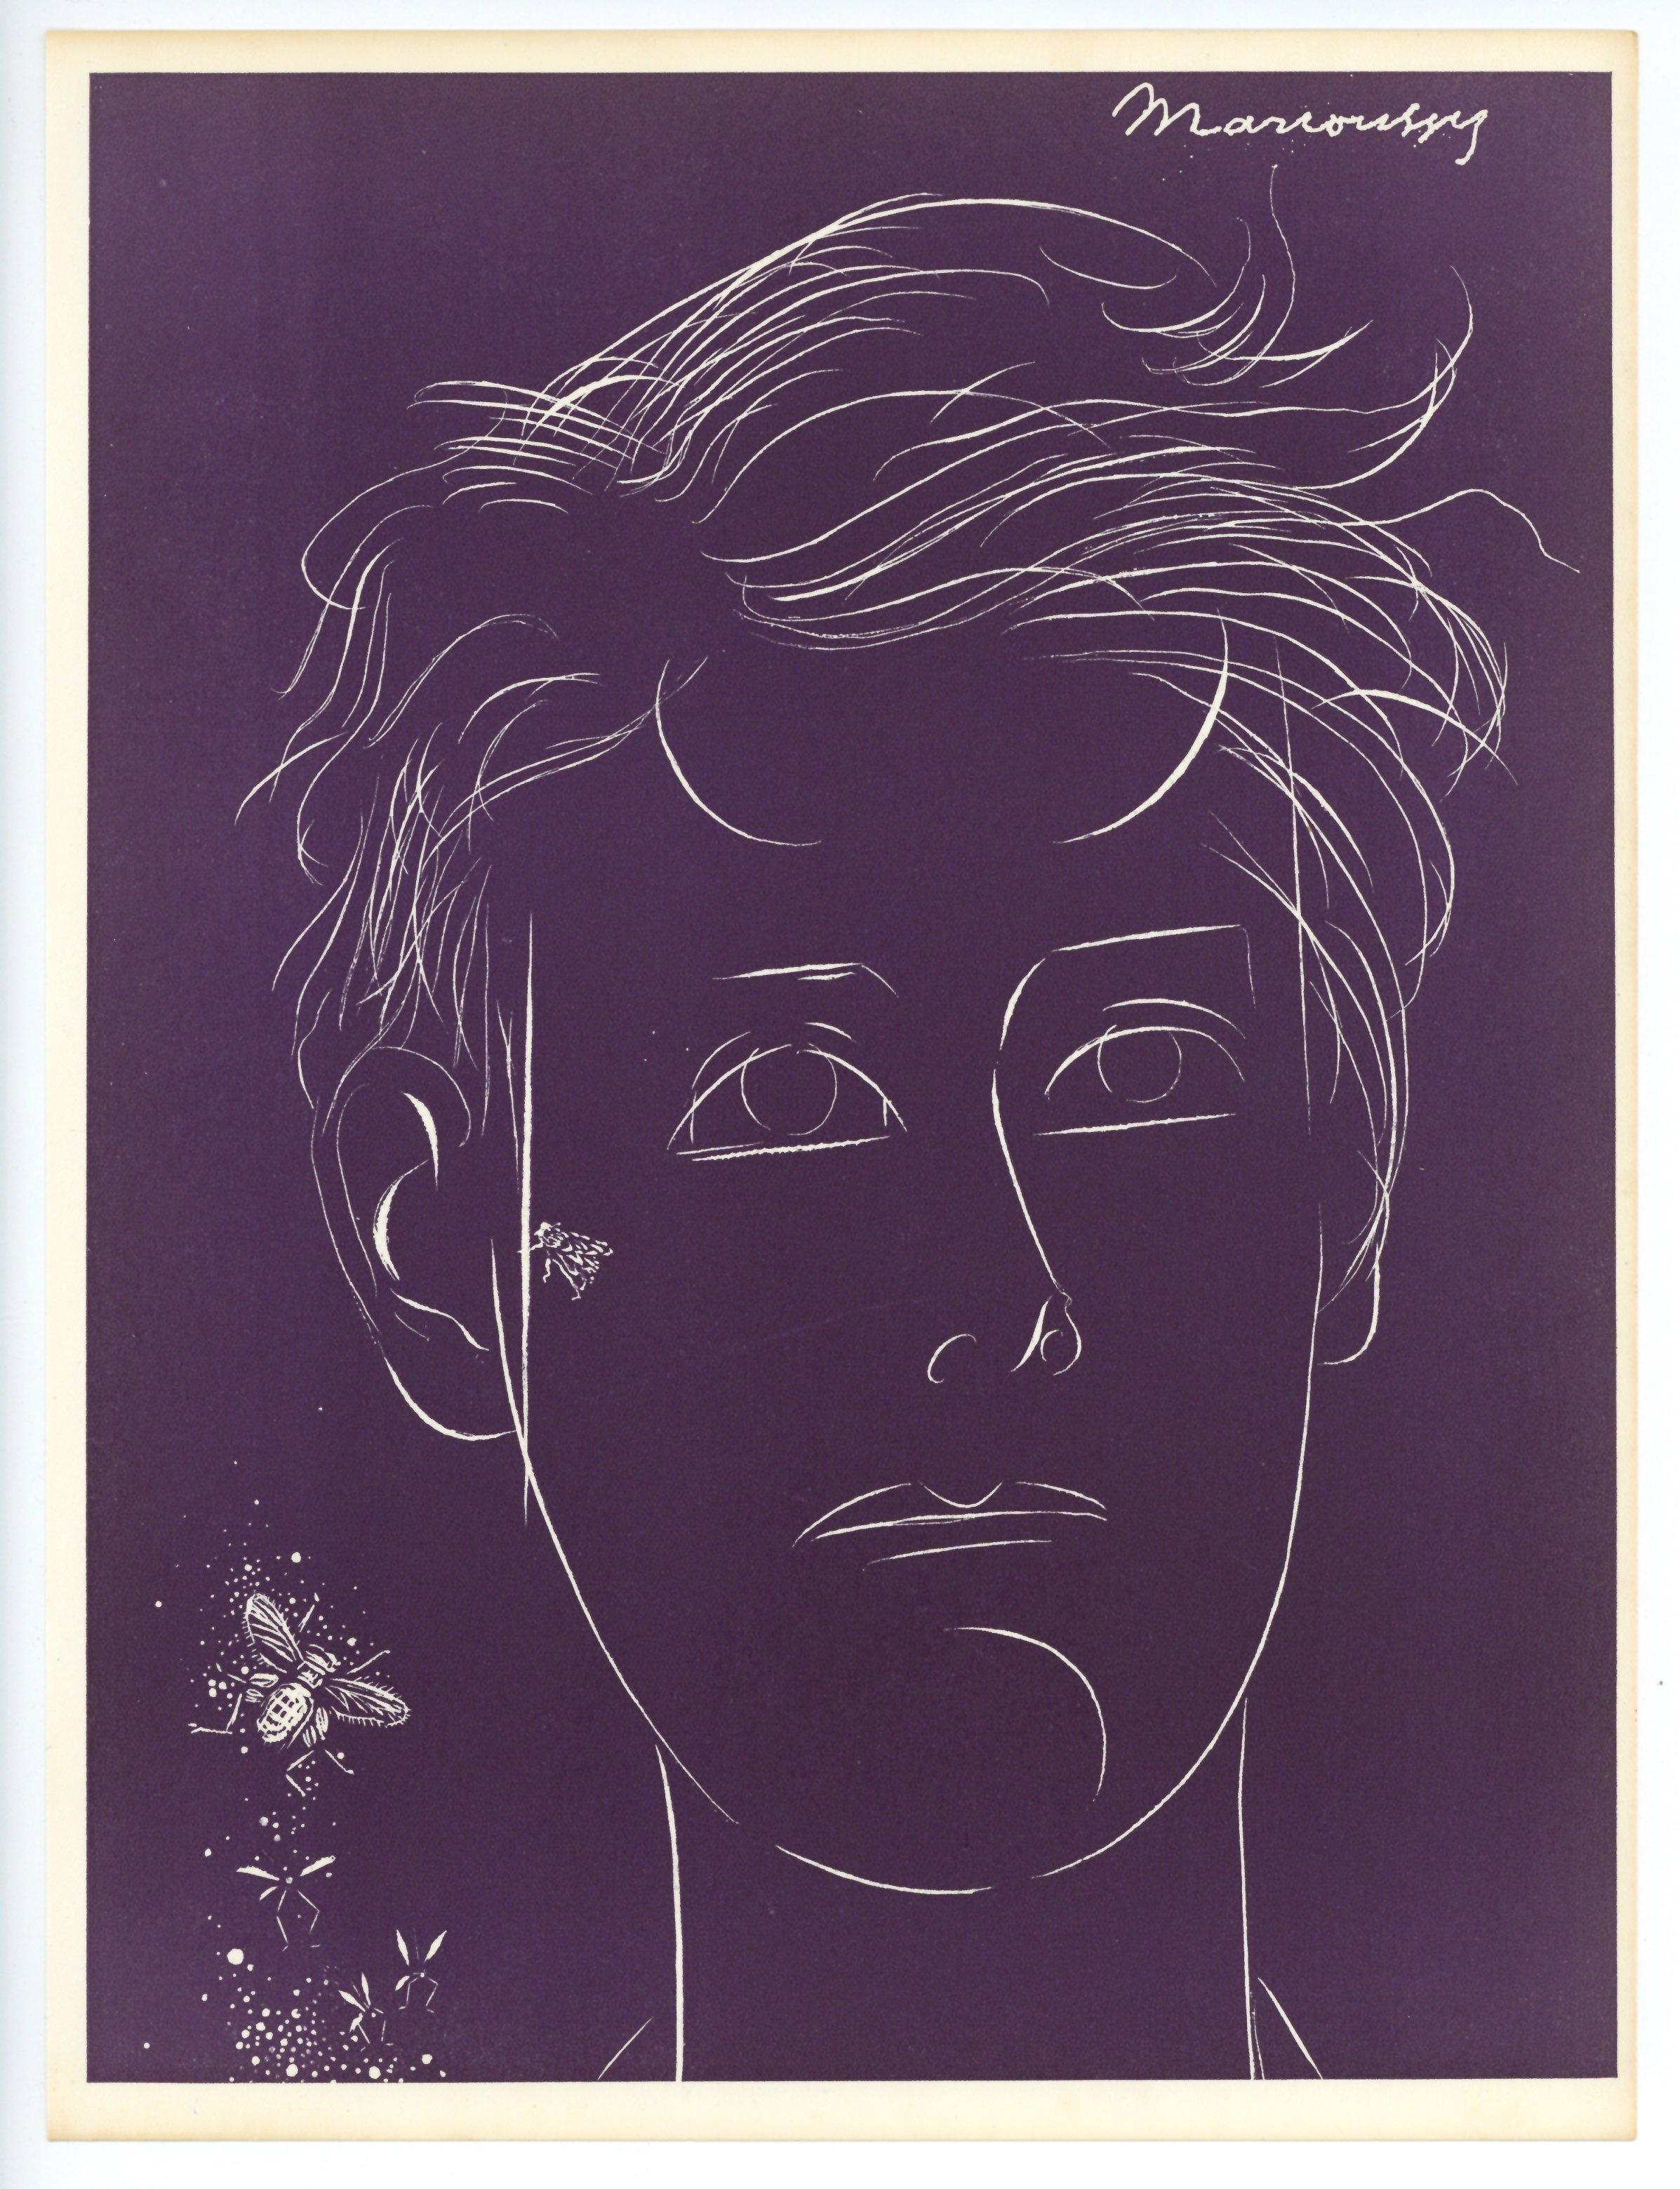 "Rimbaud" original etching - Print by Louis Marcoussis